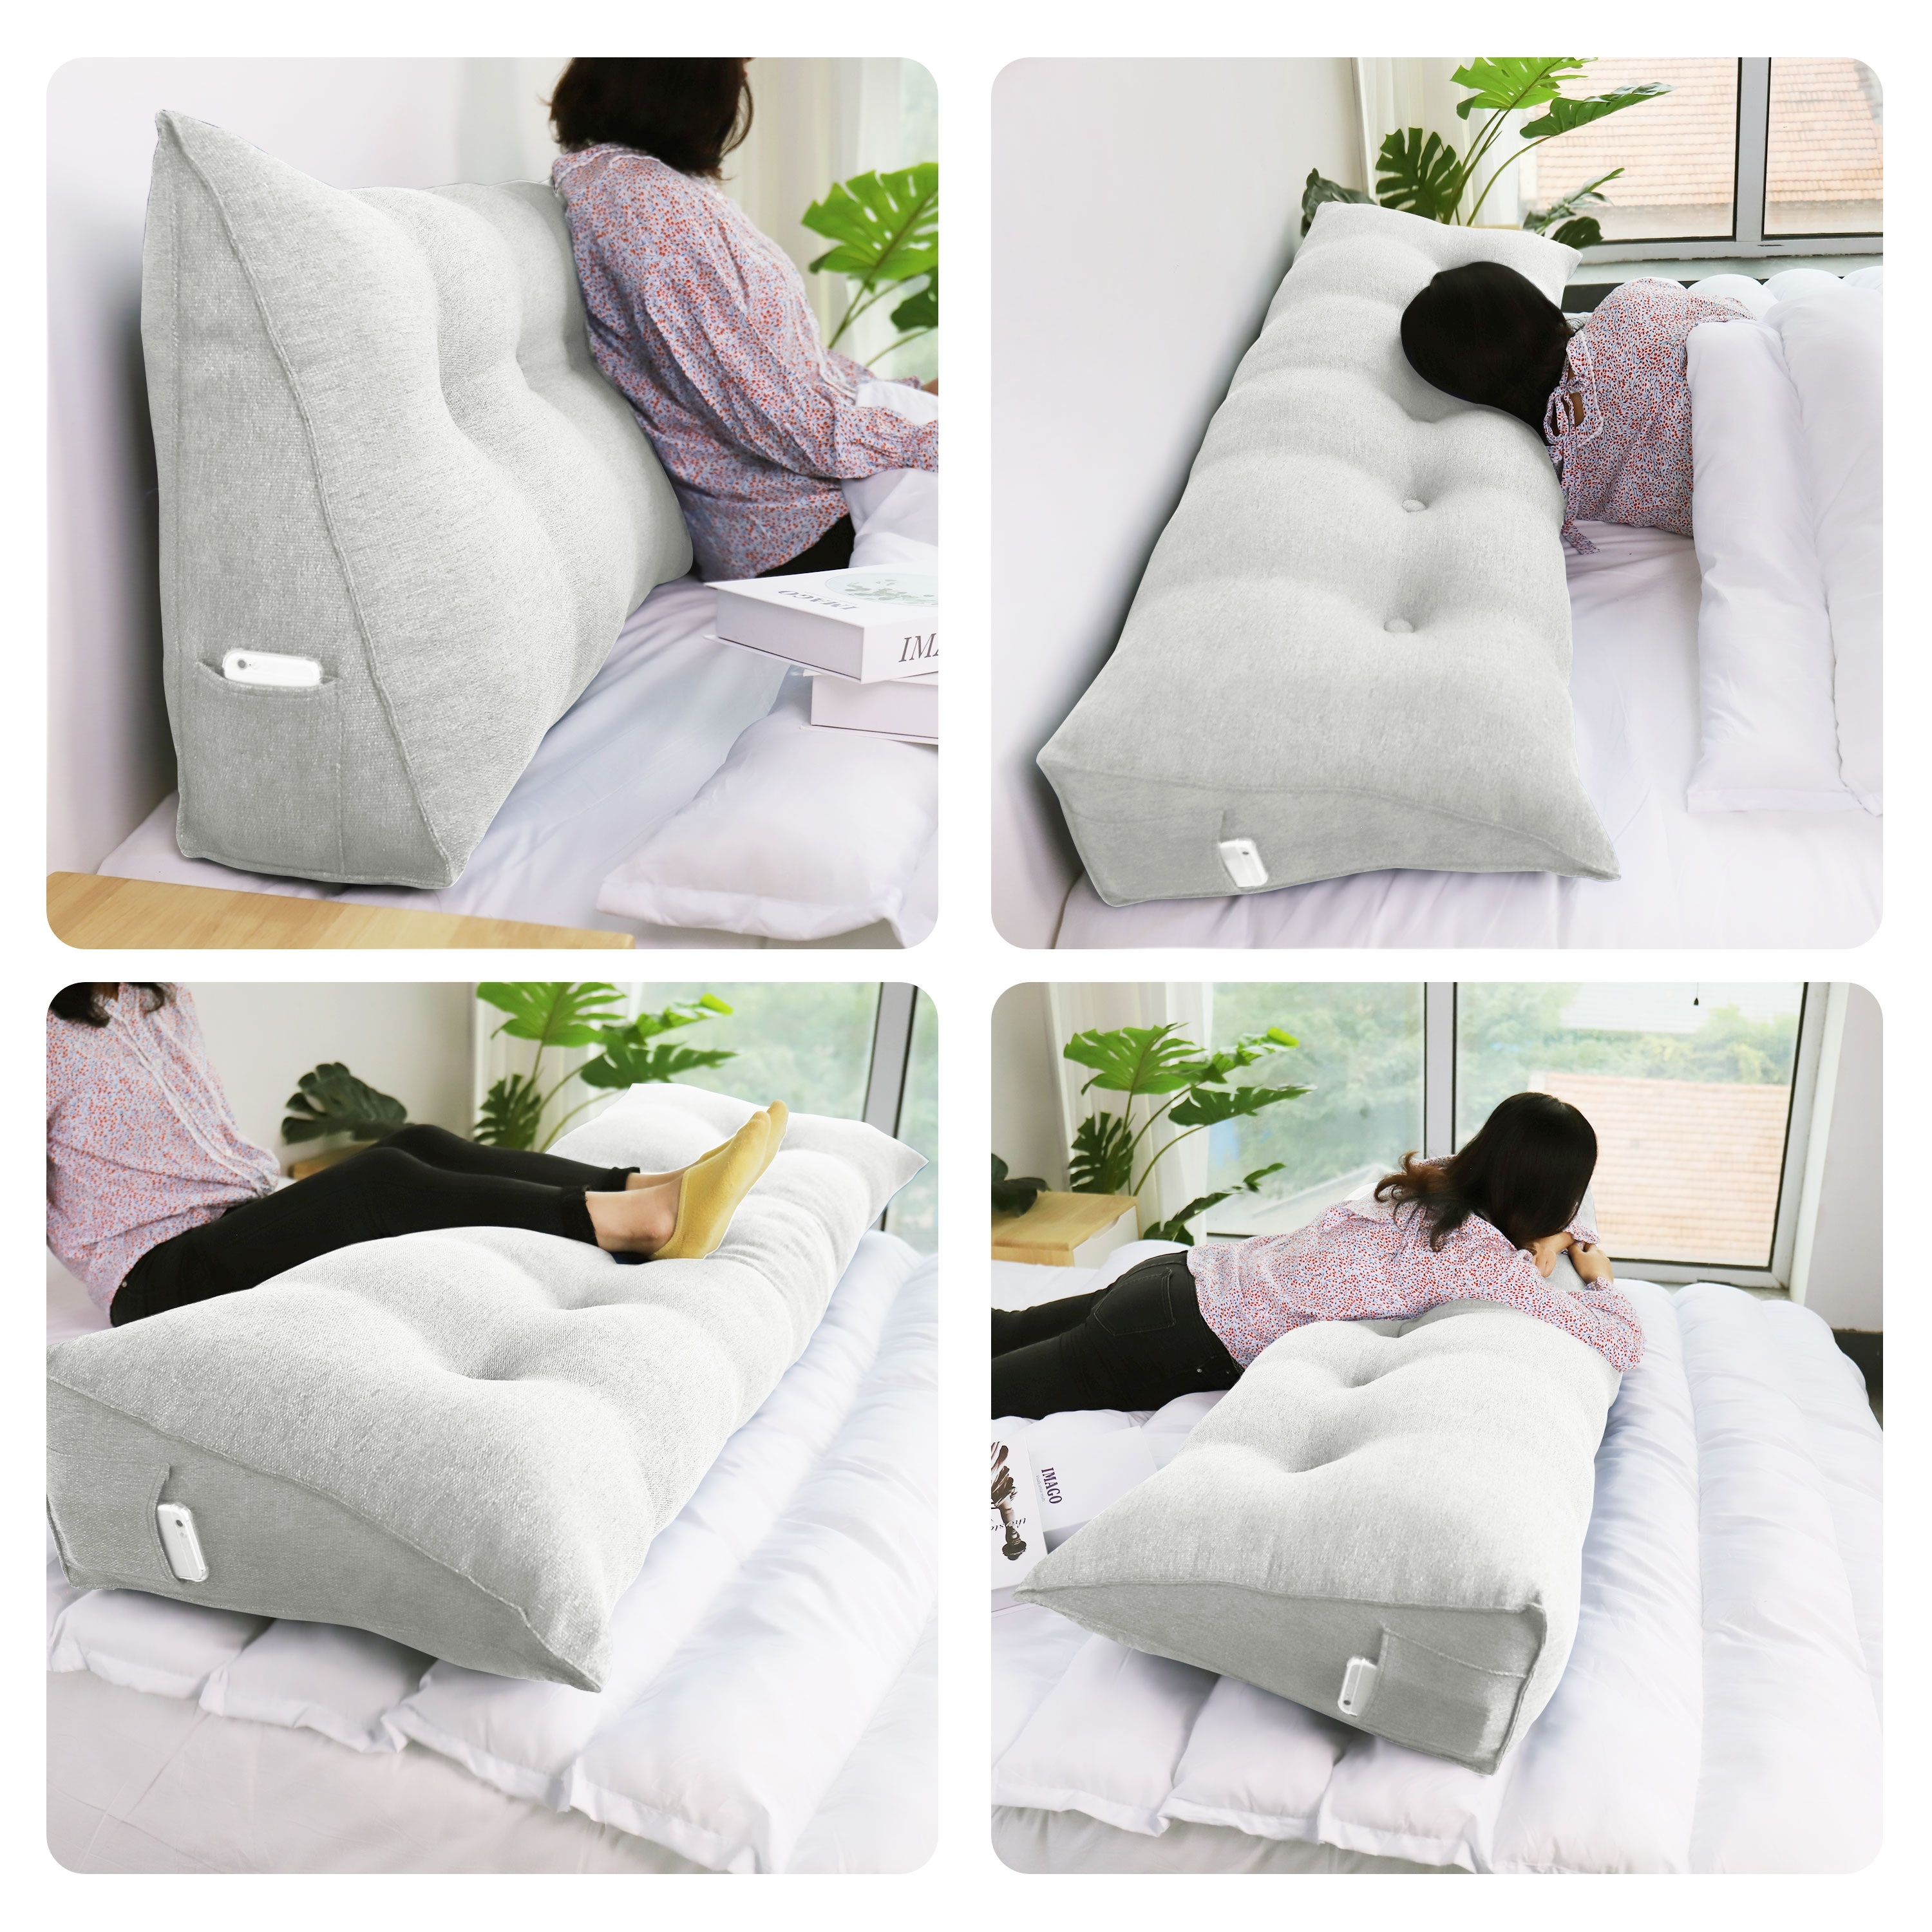 https://ak1.ostkcdn.com/images/products/is/images/direct/f388fa9f4bb98830fbdb64c0eb9e3b767911e1aa/WOWMAX-Bed-Rest-Wedge-Reading-Pillow-Headboard-Backrest-Daybed-Support-Ivory-California-King.jpg